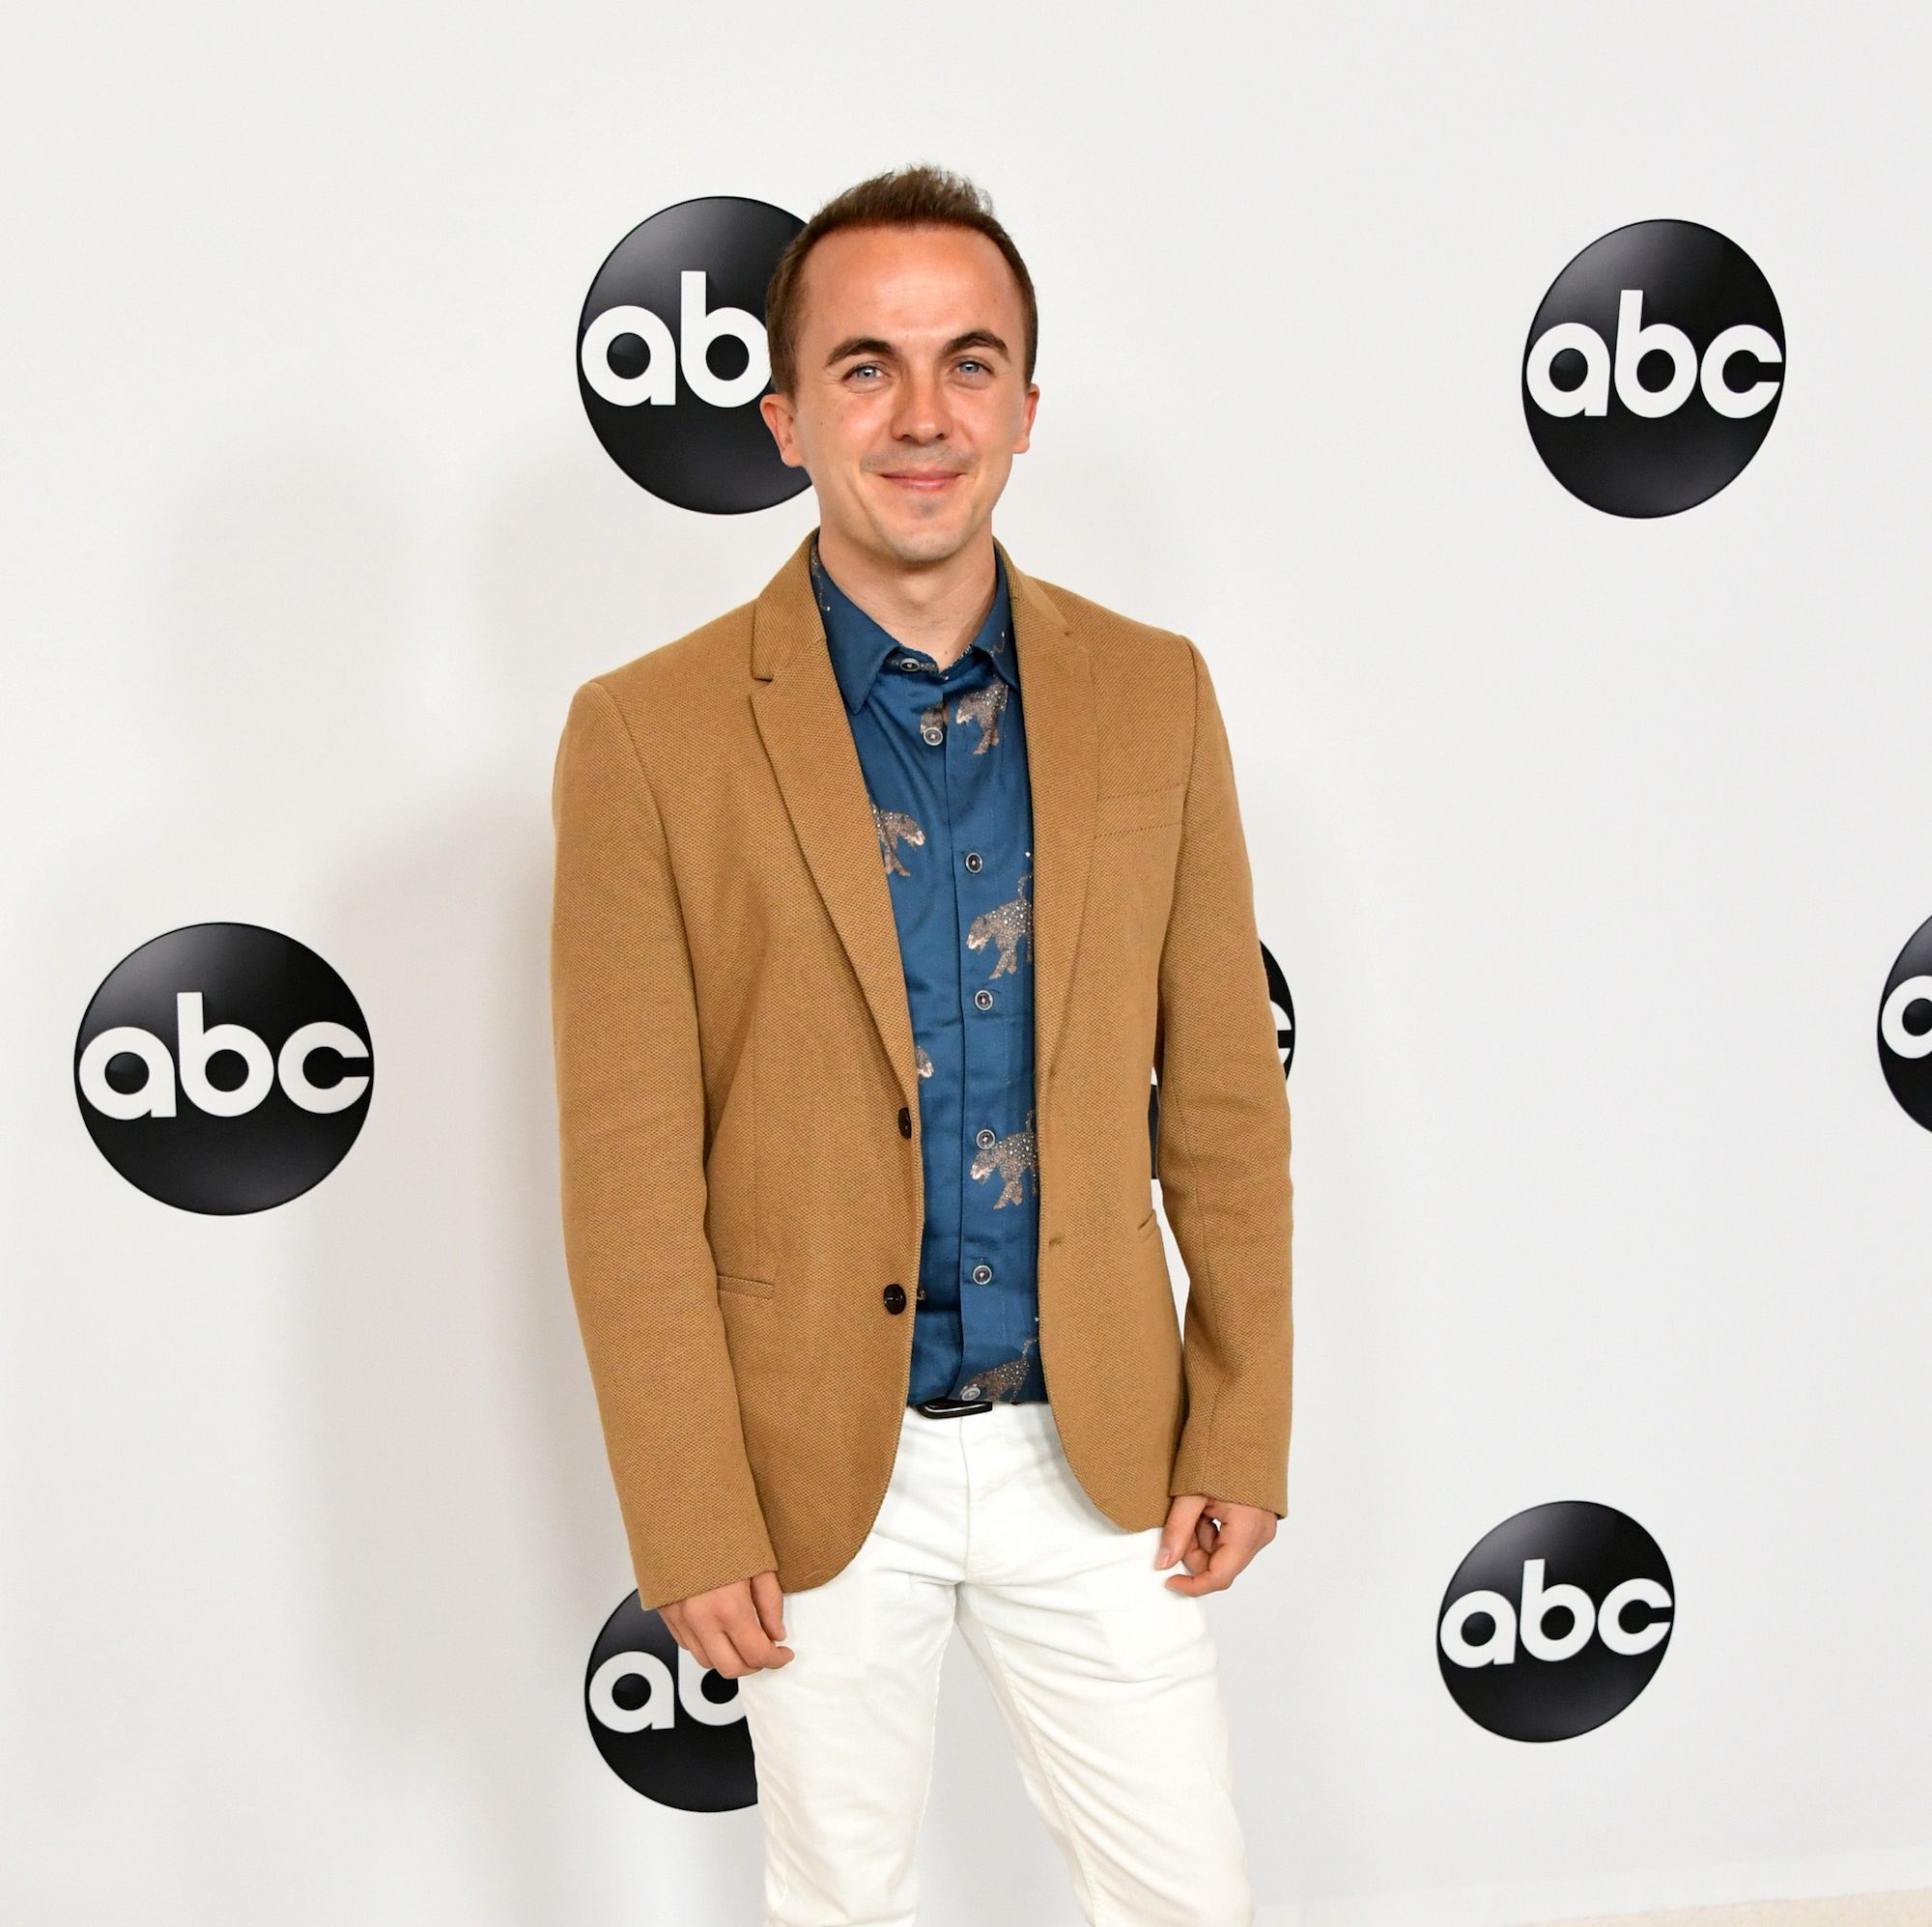 Frankie Muniz Says He Will ‘Never’ Allow His Son to Become a Child Actor